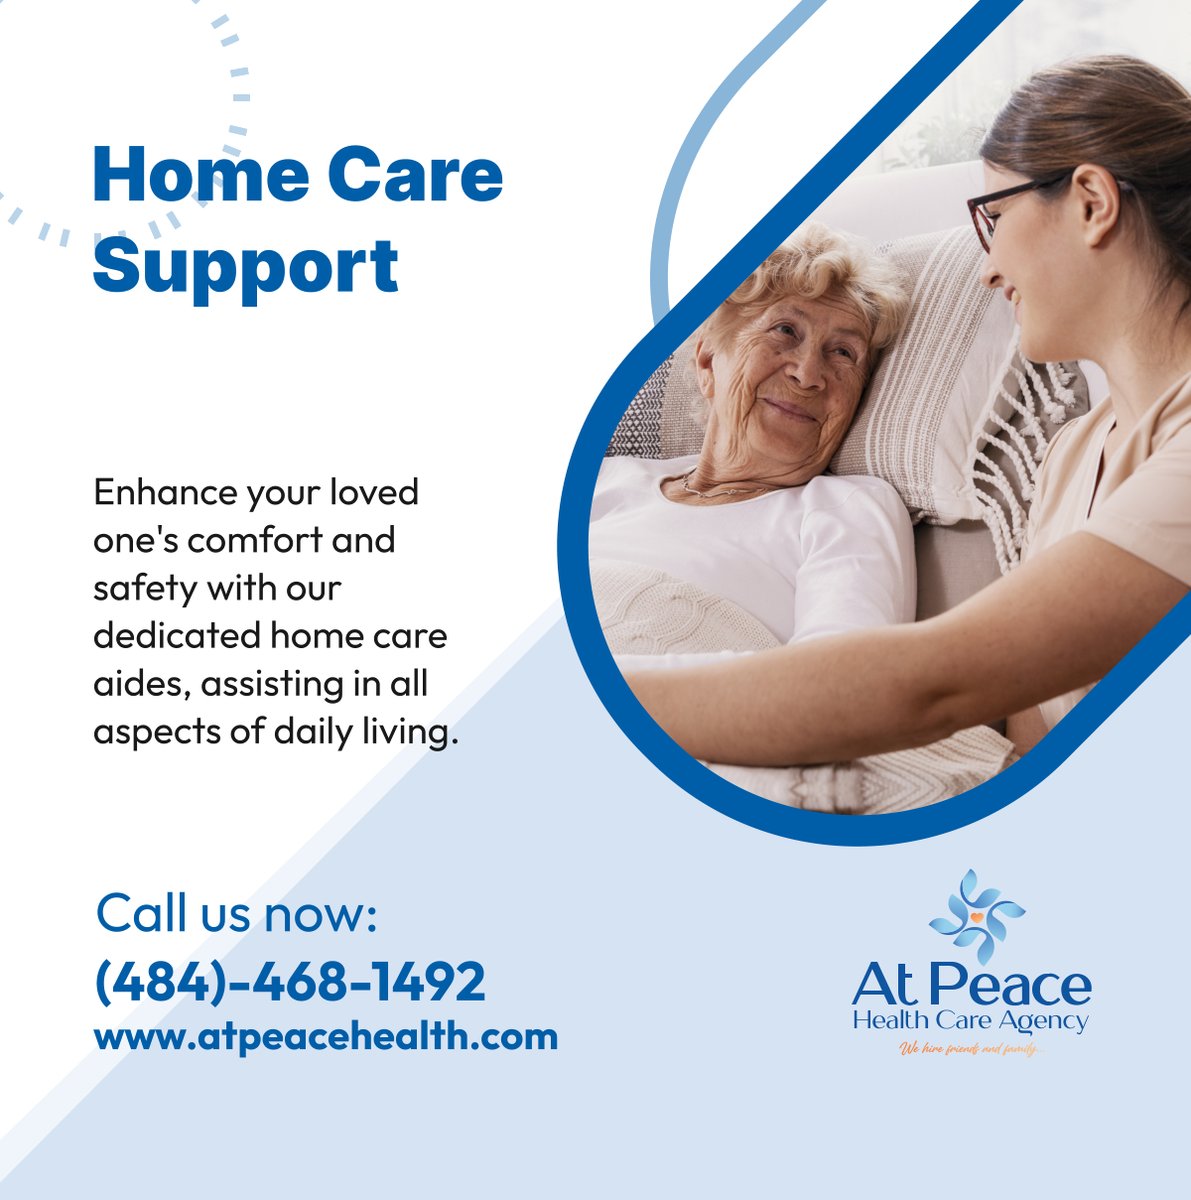 From personal care to emotional support, our home care aides make life easier and more joyful for your loved ones. Contact us now! 

#PhiladelphiaPA #HomeHealthCare #DailyLivingSupport